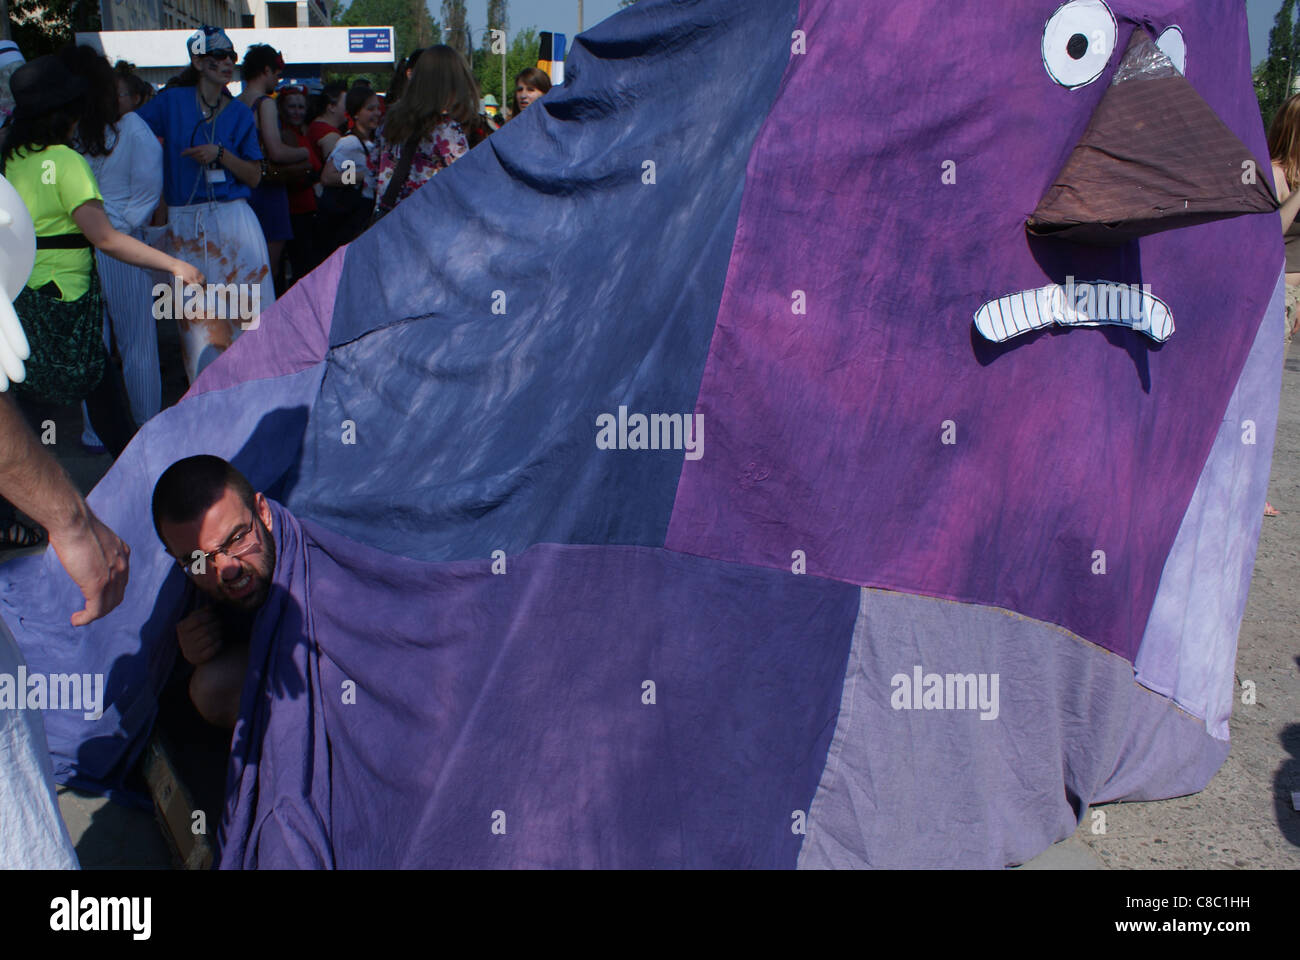 Student disguised as Groke, during Juwenalia Students Festival in Cracow, serial spring party. Stock Photo